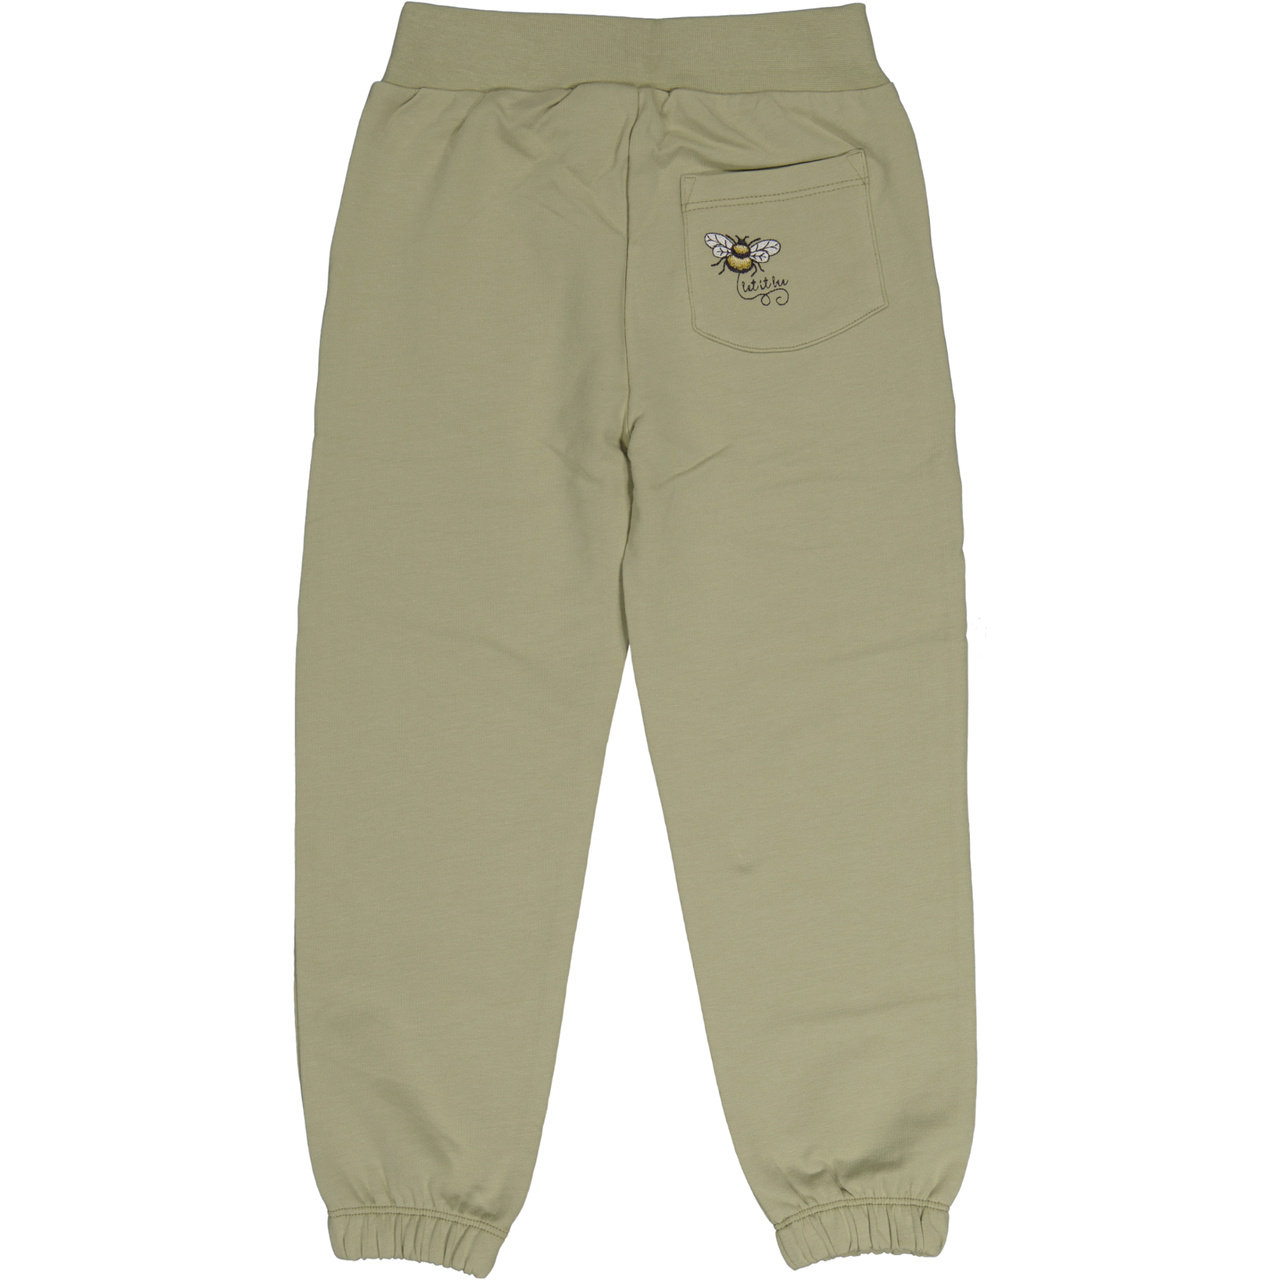 College trousers Olive 74/80